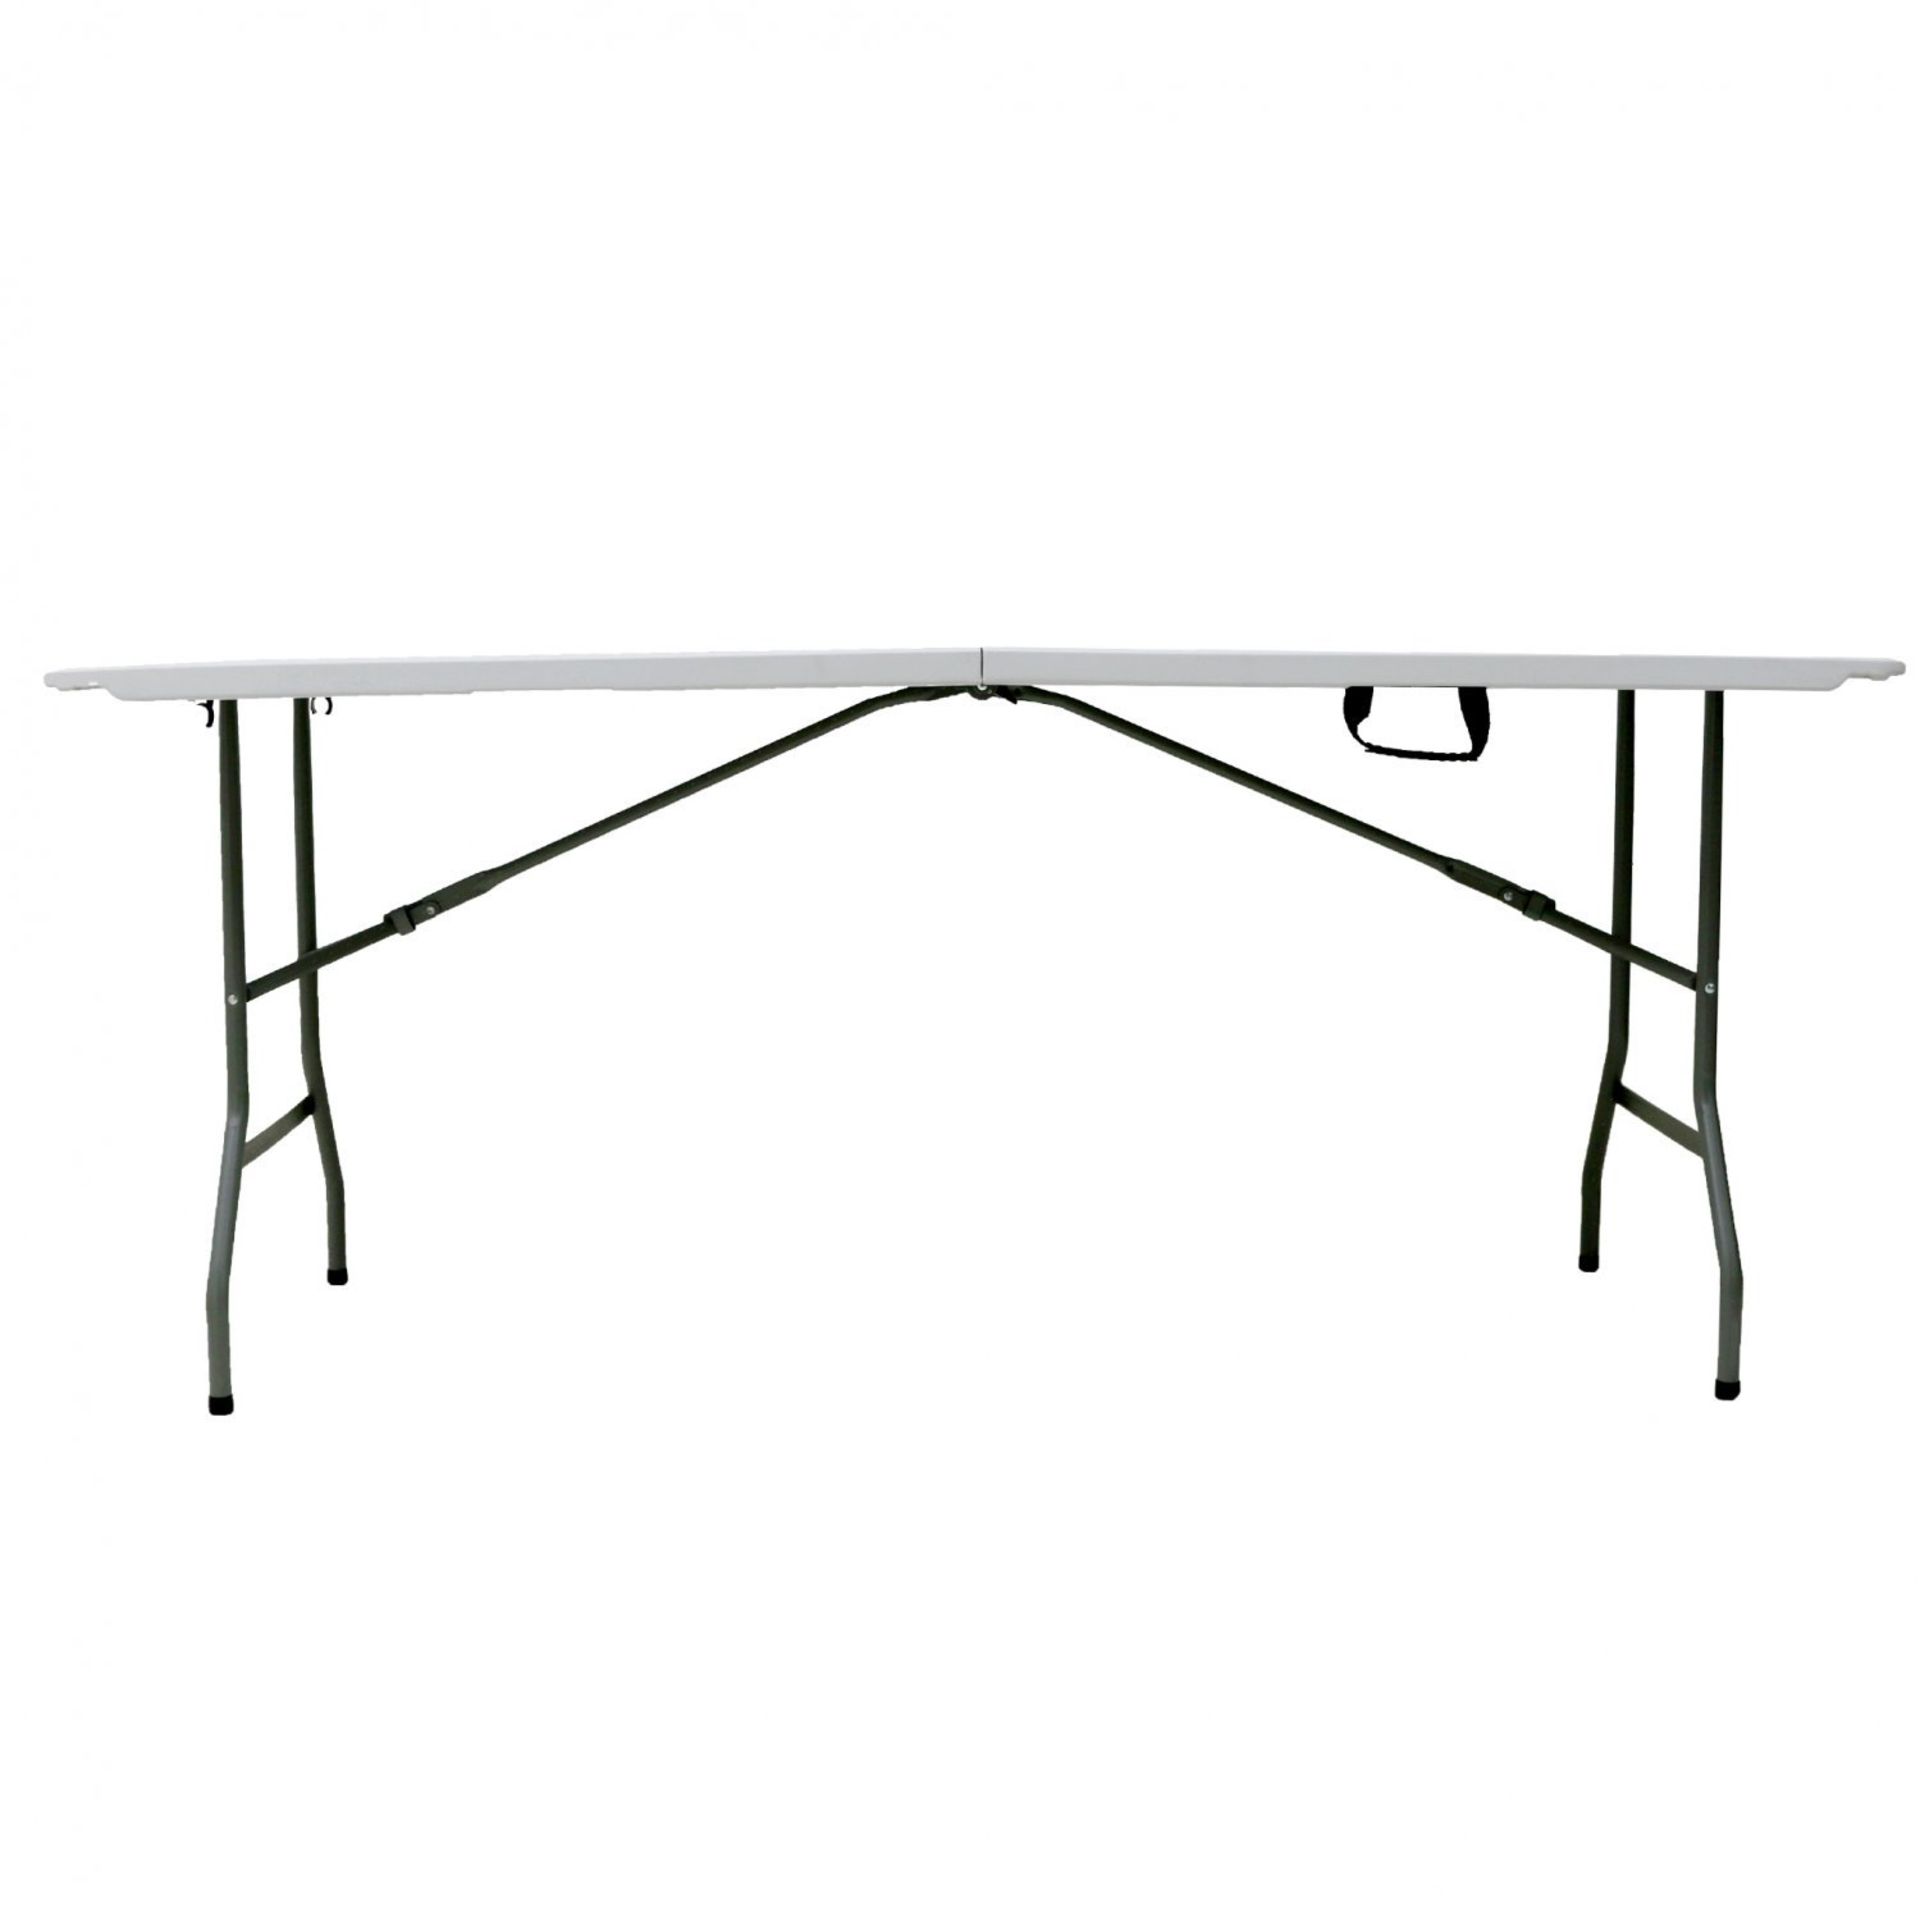 (SK10) 6ft 1.8m Folding Heavy Duty Catering Outdoor Trestle Party Garden Table The folding t... - Image 2 of 2